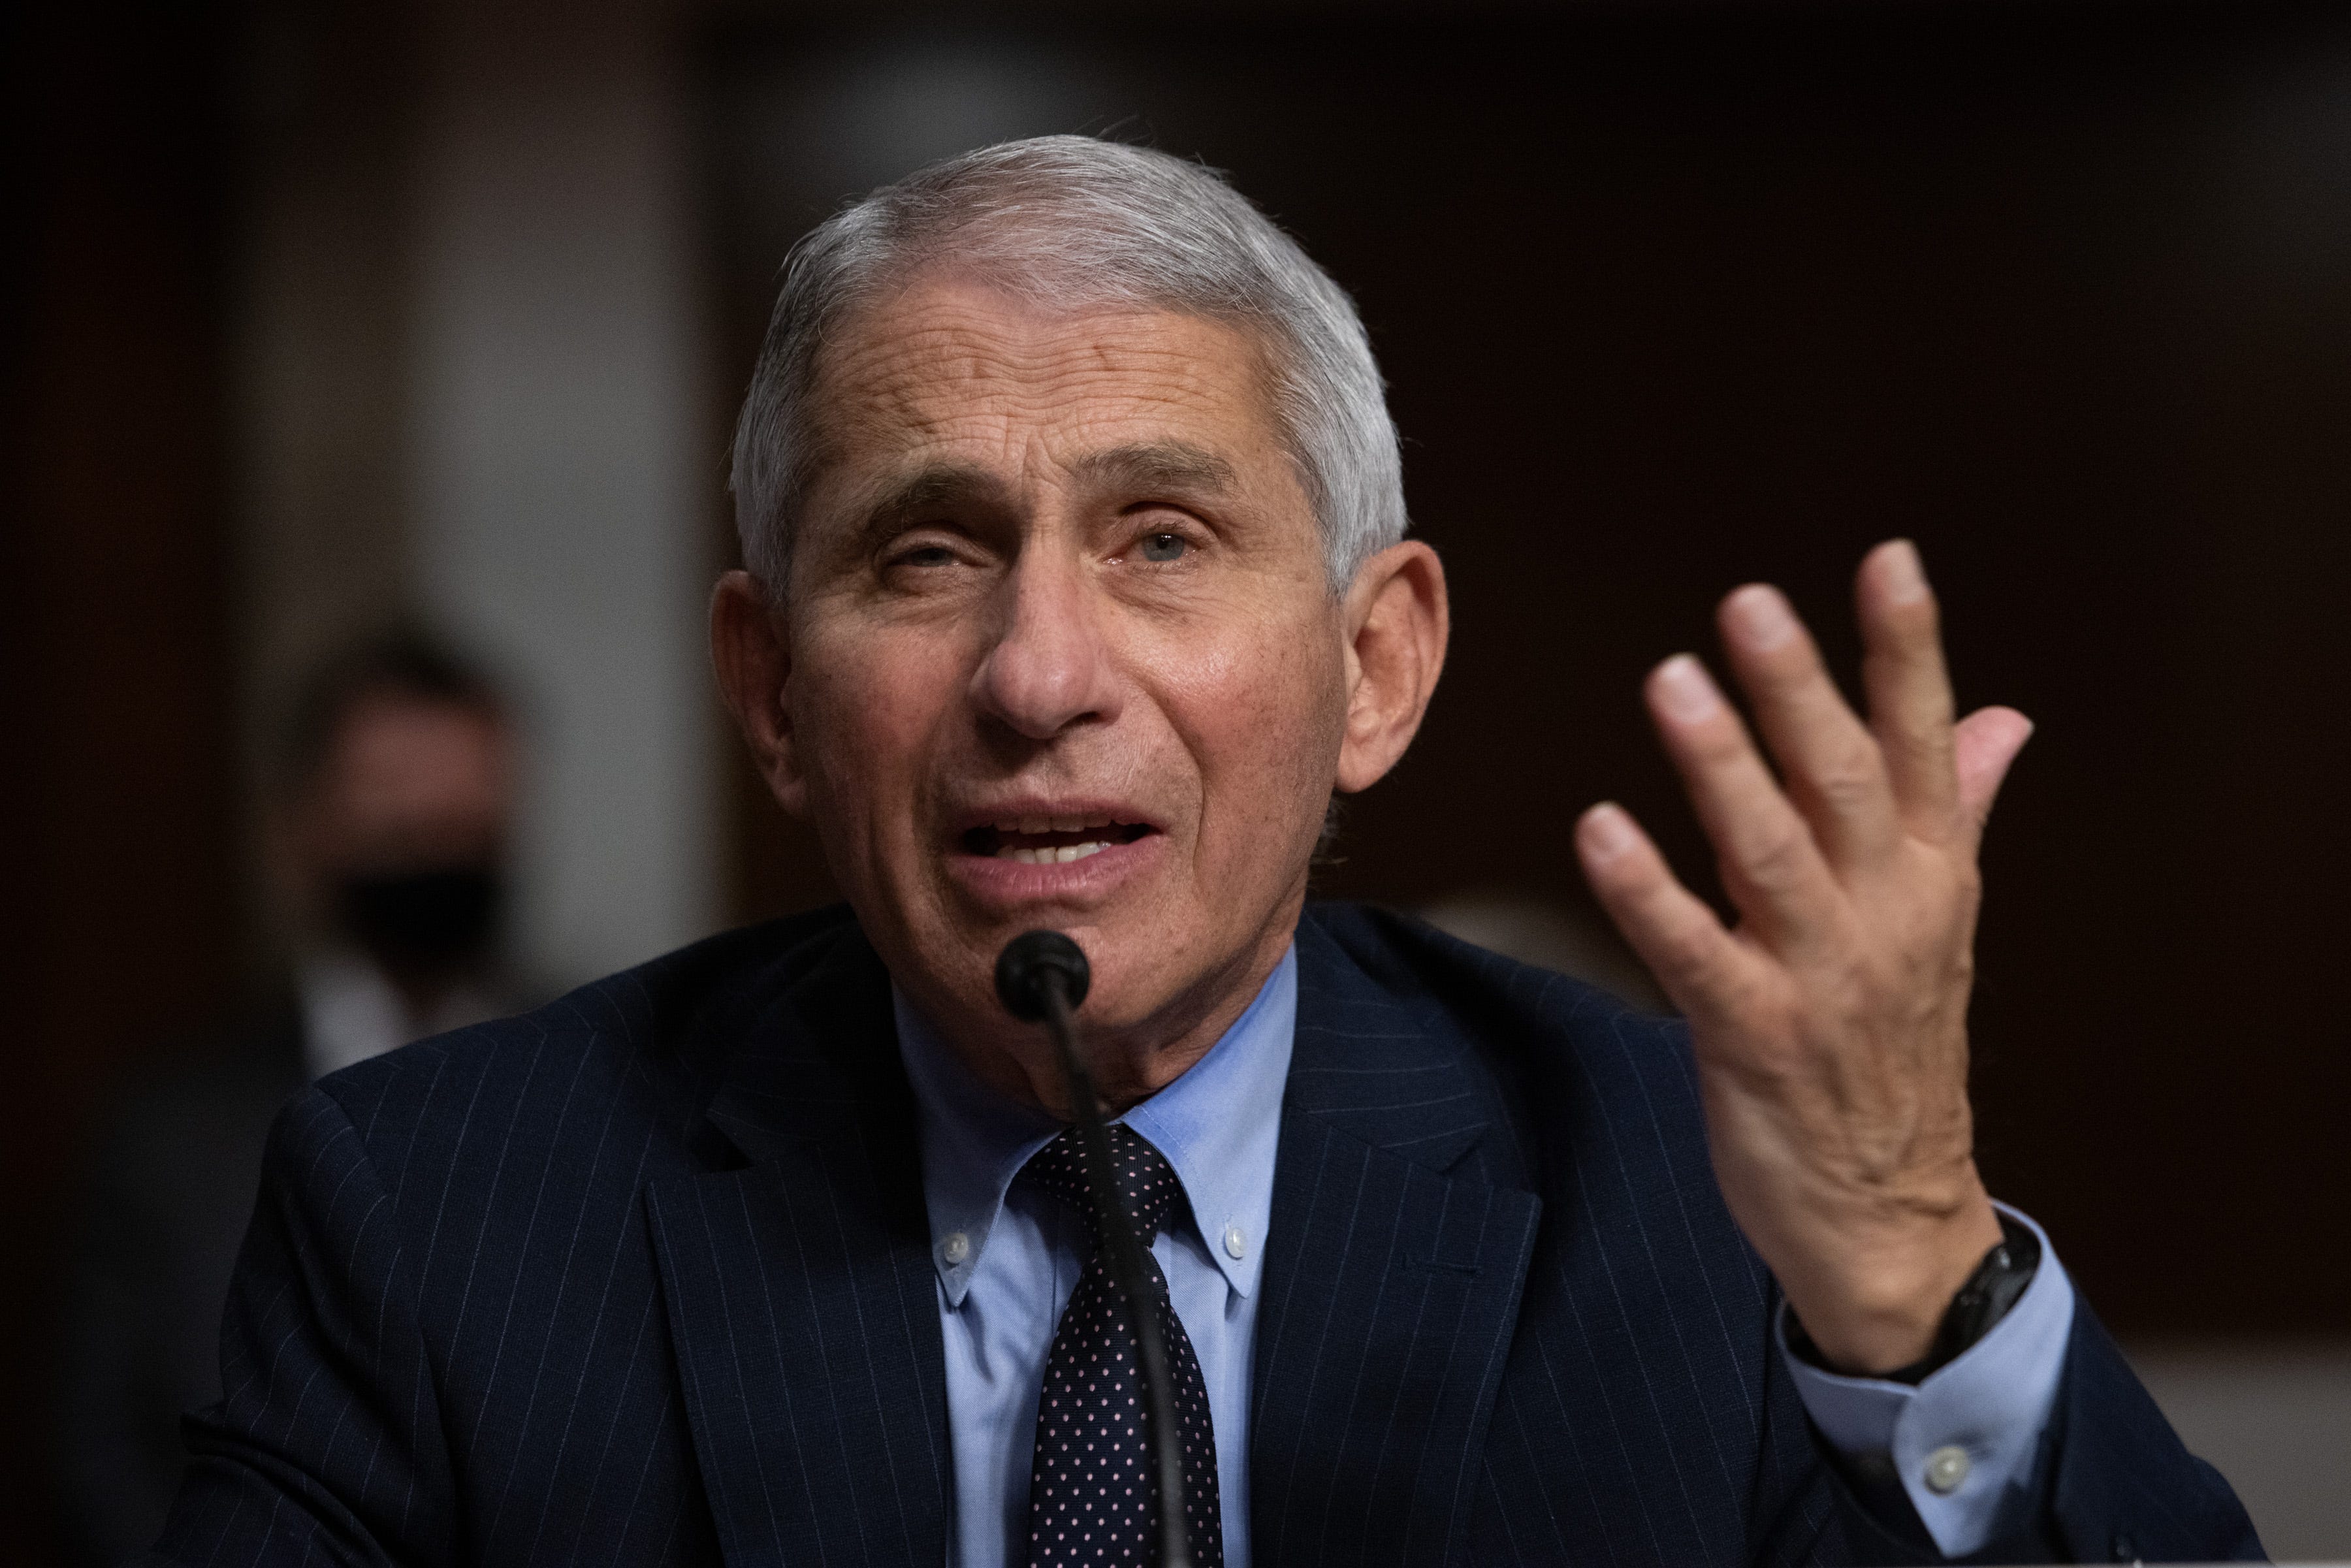 Fauci: Trump ad taking him out